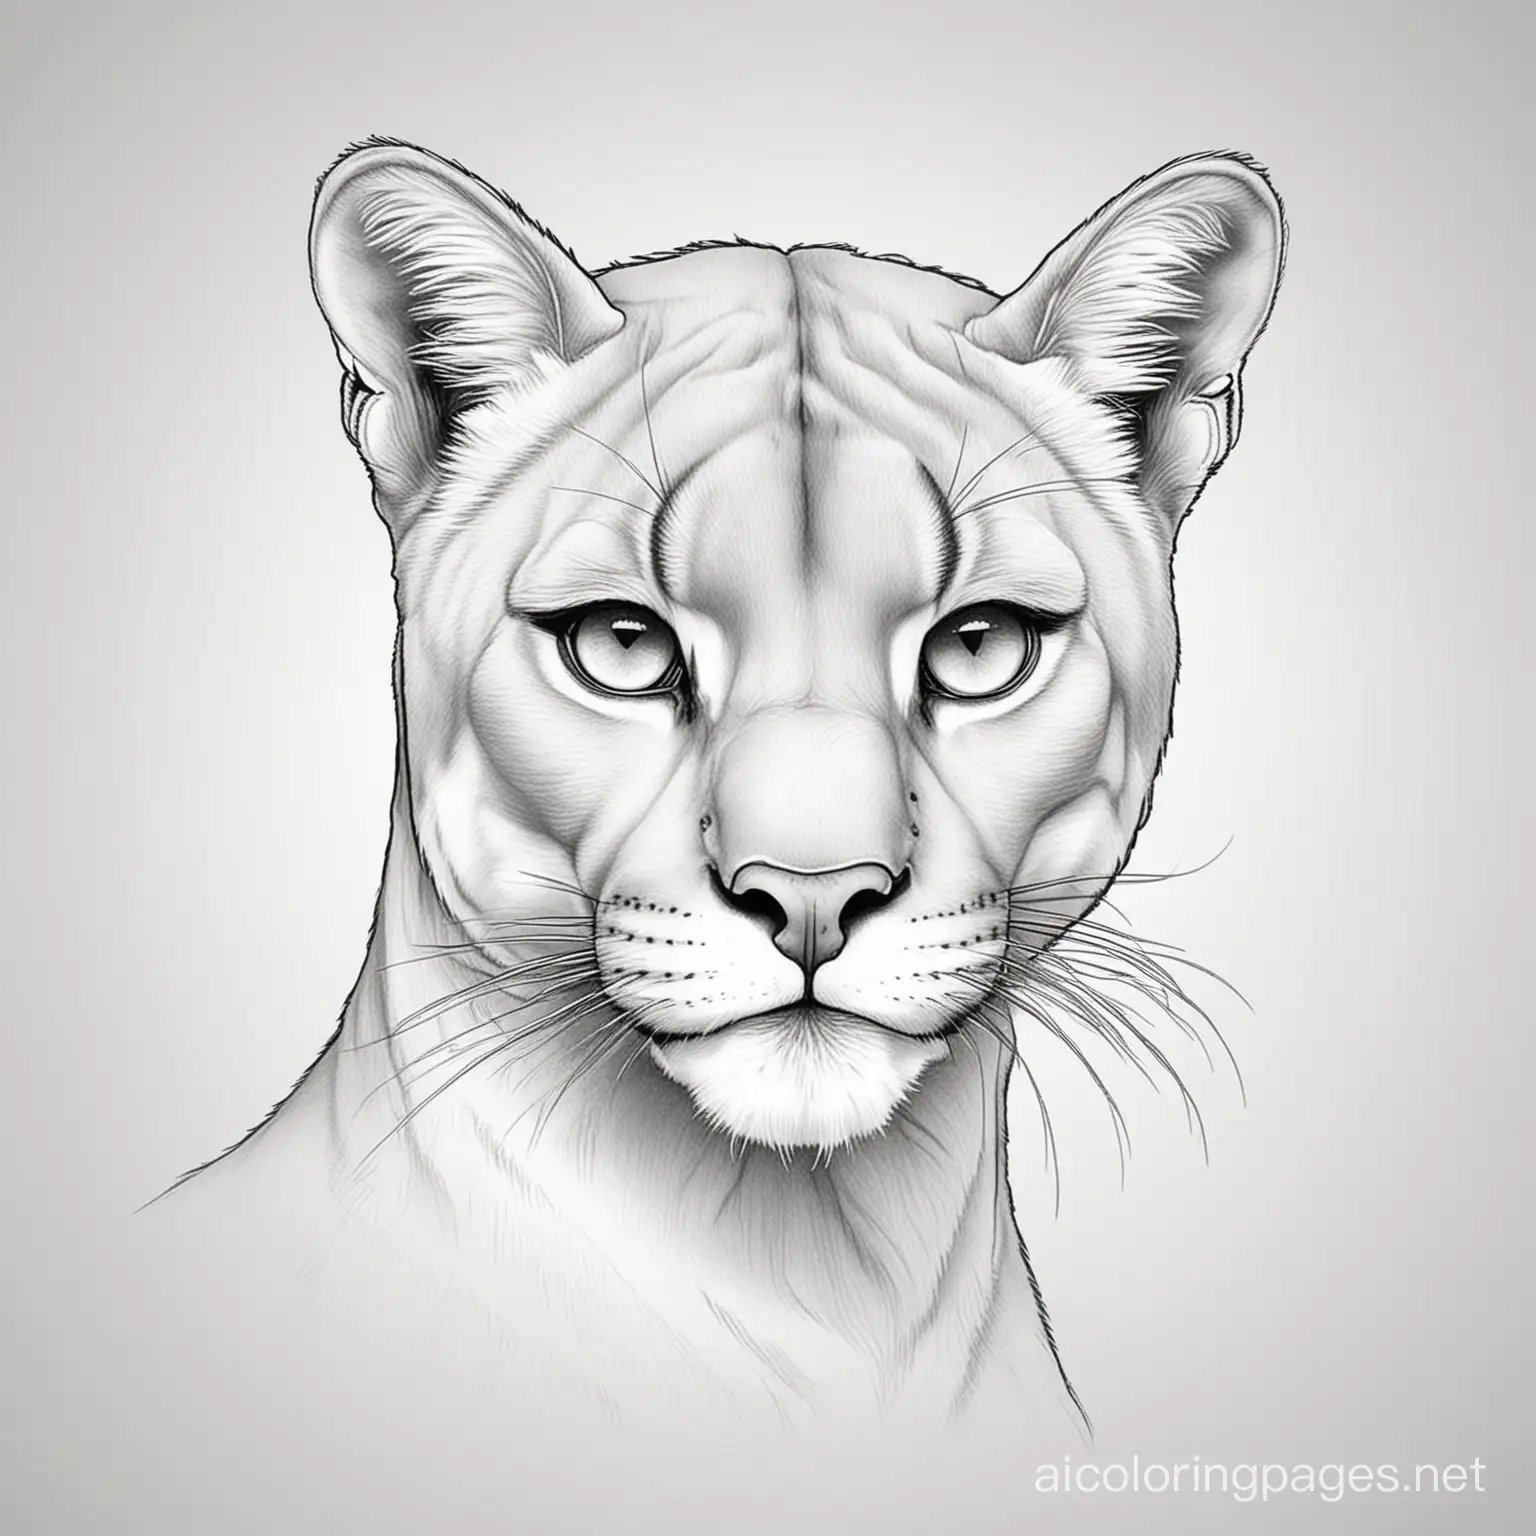 Cougar-Line-Art-Coloring-Page-with-Ample-White-Space